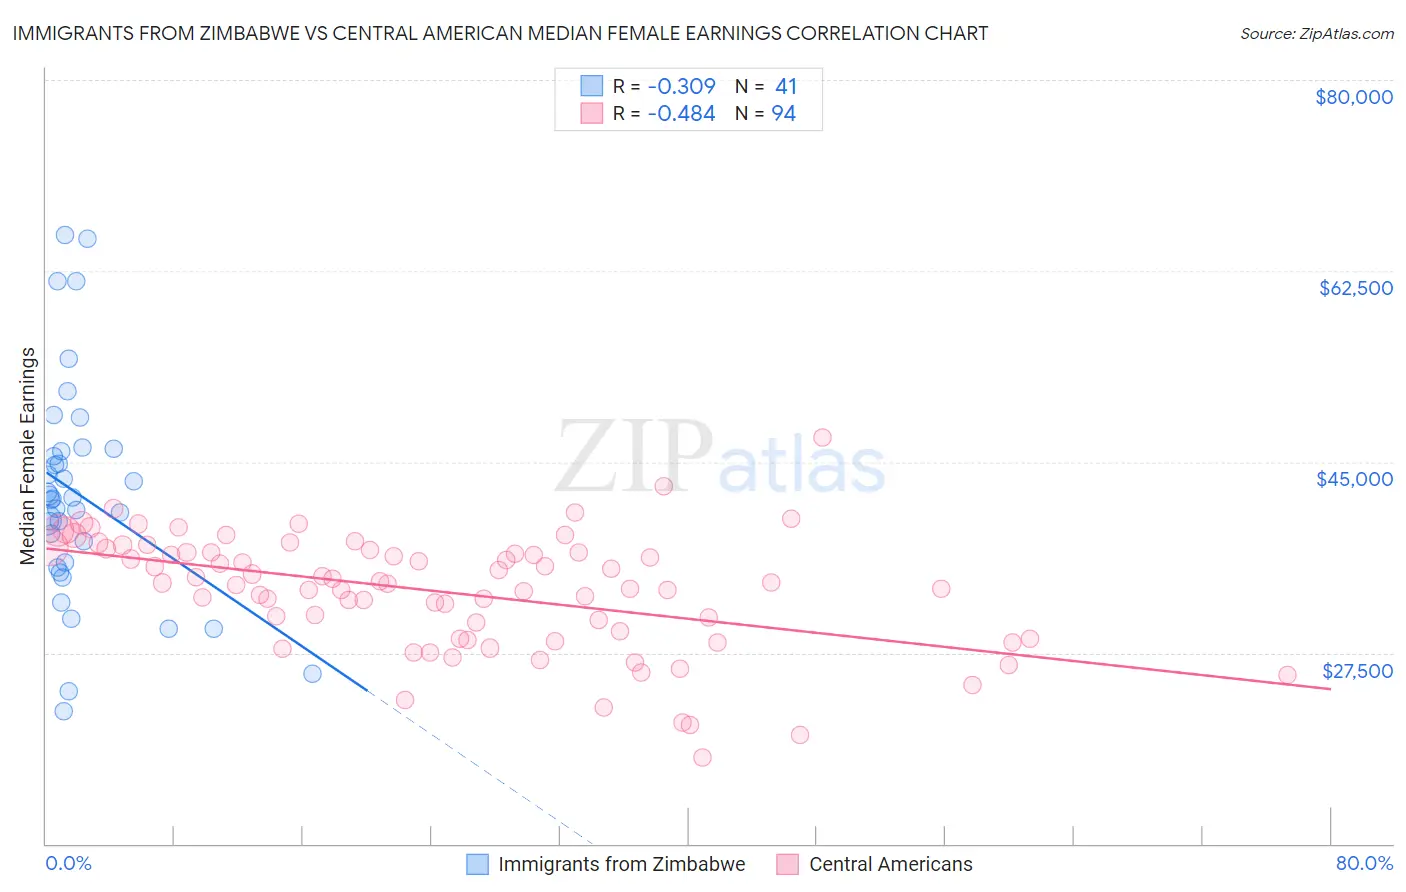 Immigrants from Zimbabwe vs Central American Median Female Earnings